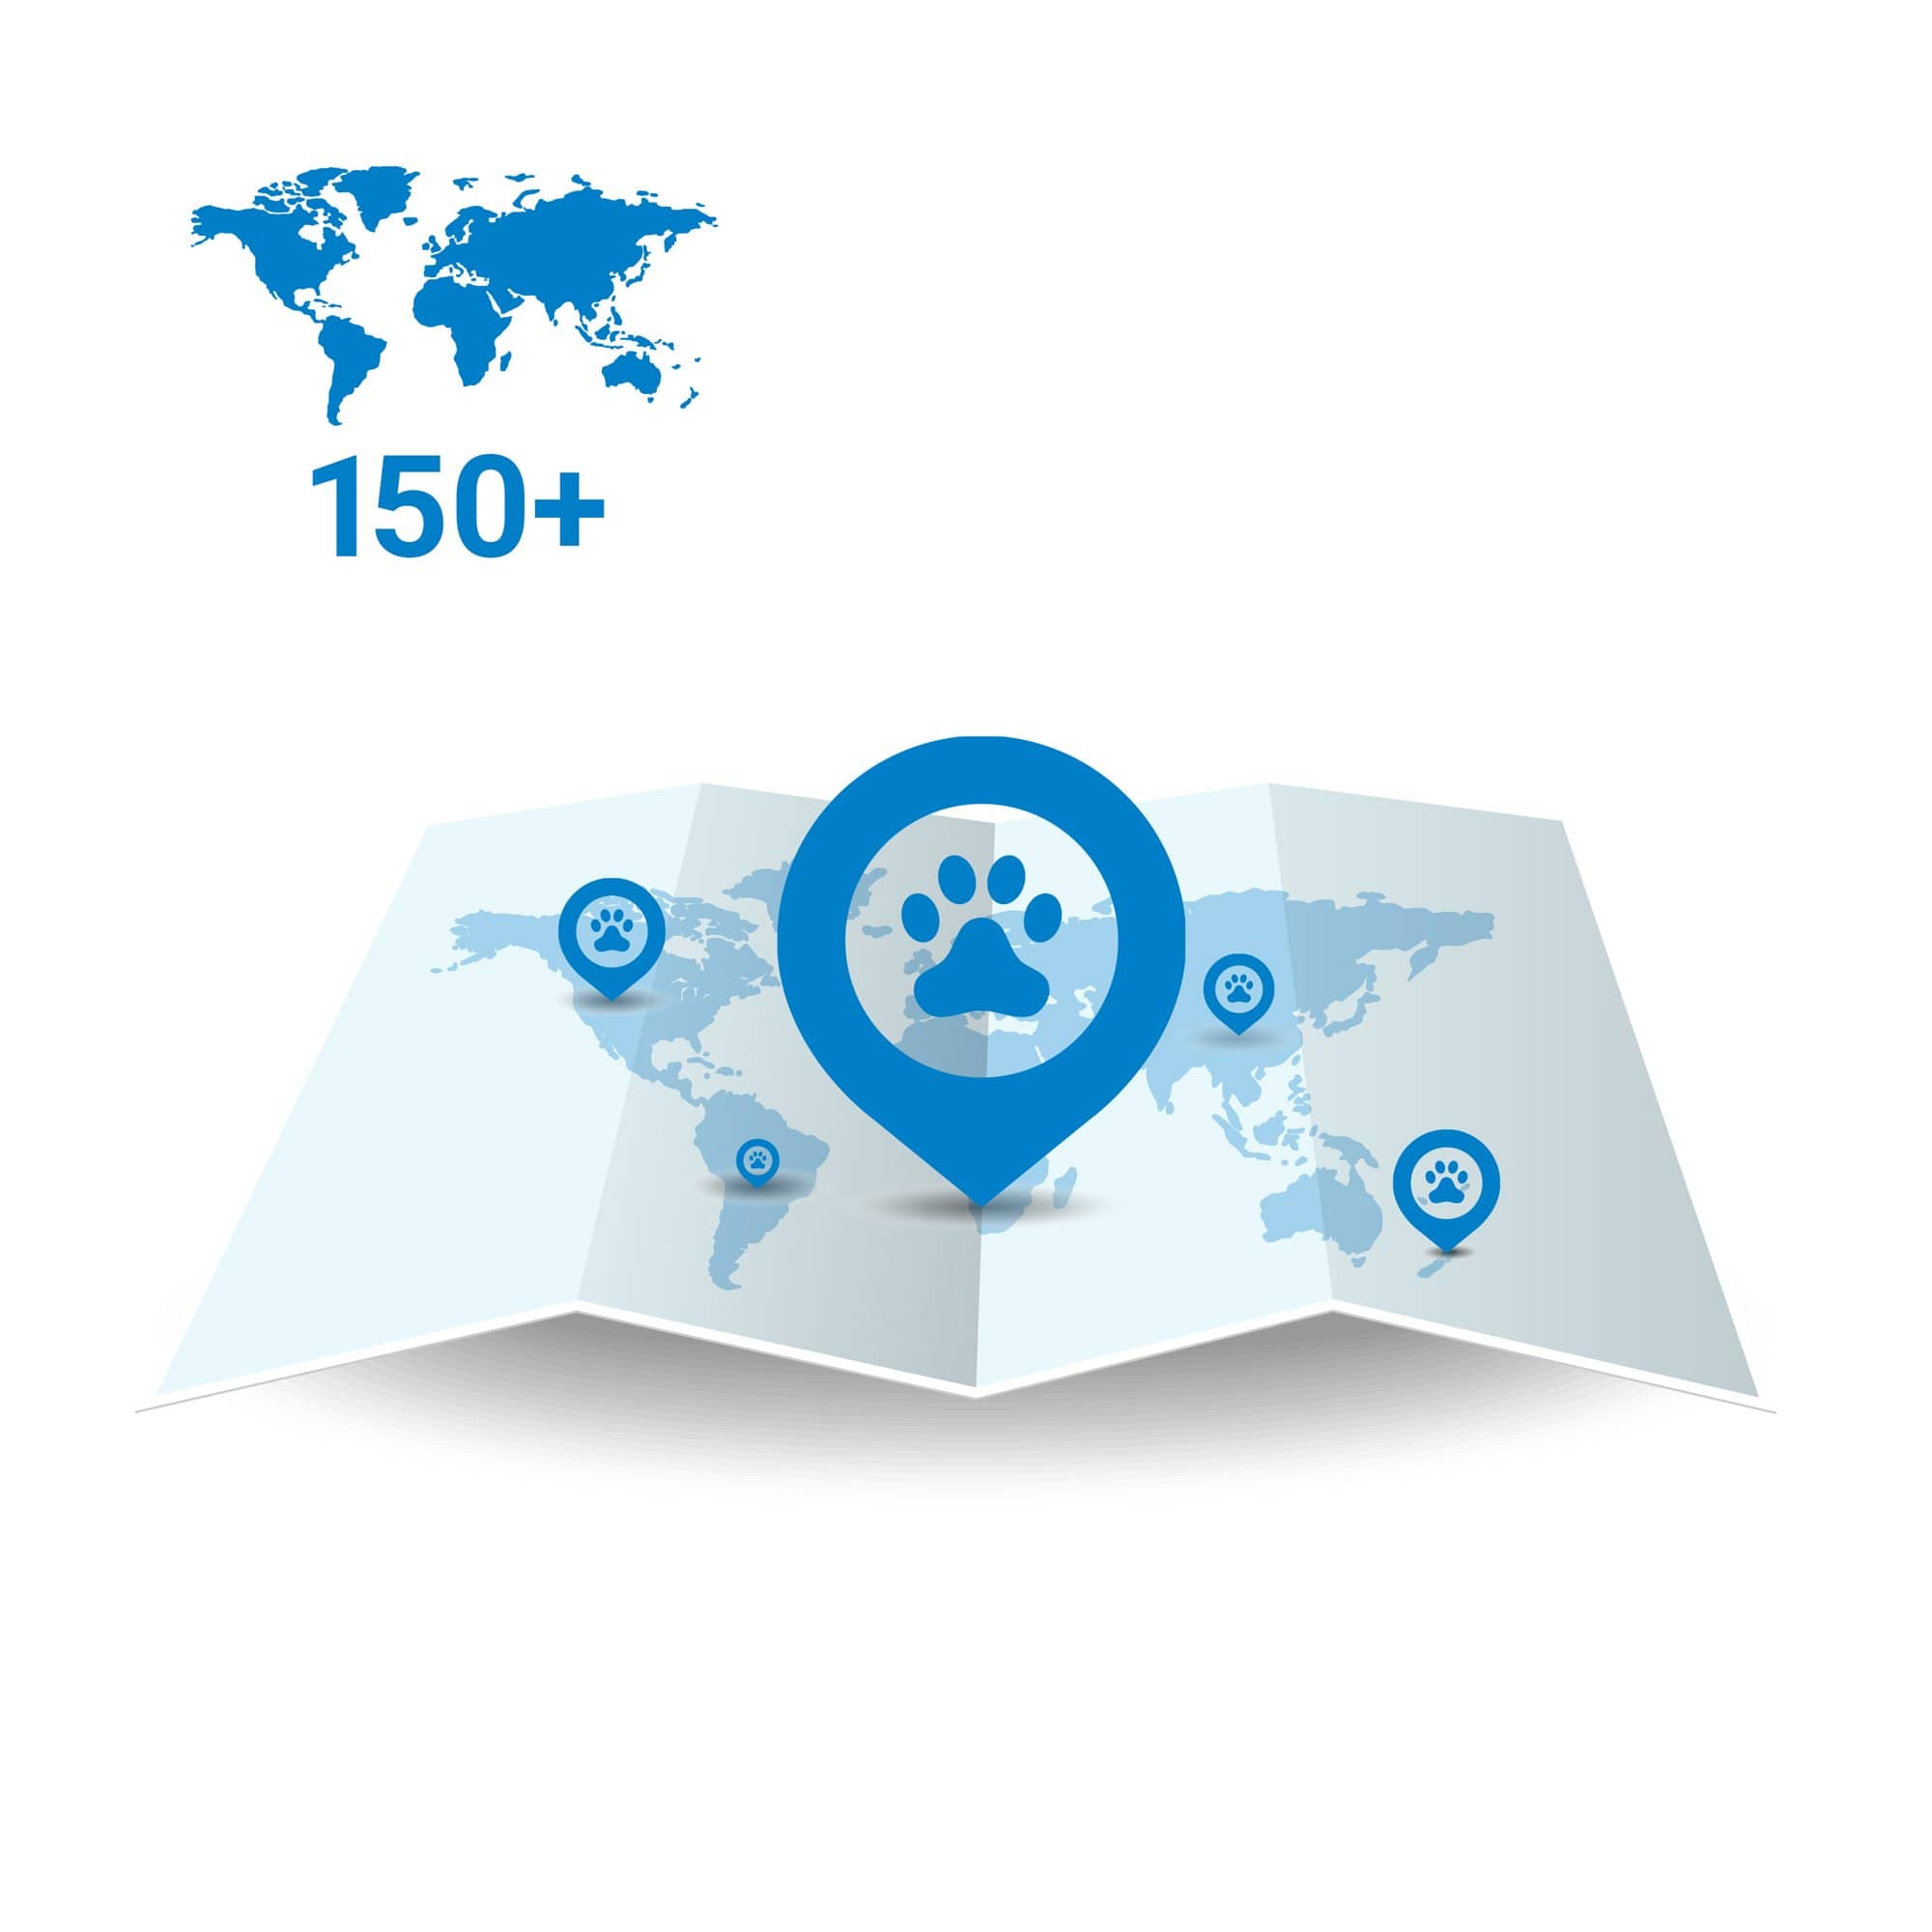 Shows that the Tractive GPS Tracker system works in over 150 Countries.